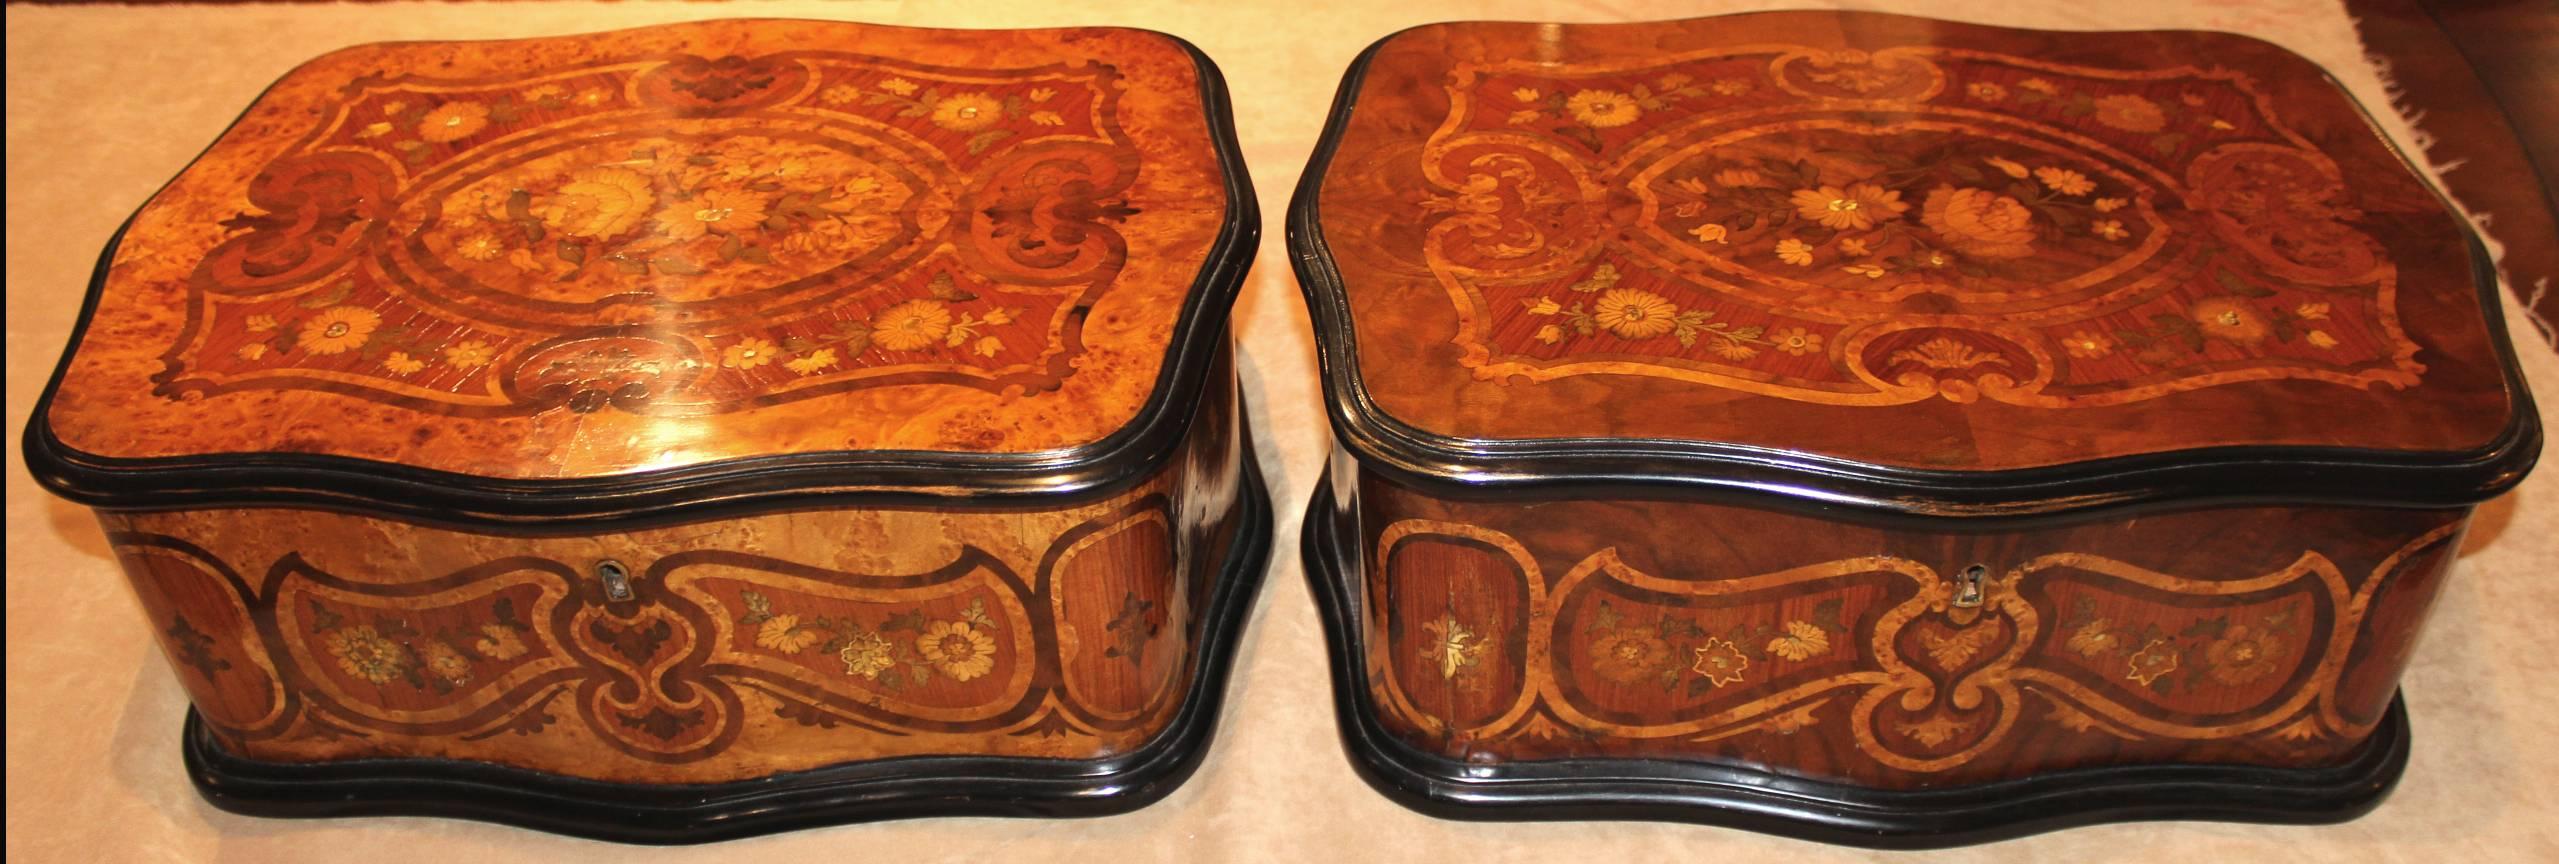 A spectacular pair of serpentine marquetry boxes with burl and satinwood foliate inlay with tufted silk interior upholstery and ebonized trim and base, 19th century, French.